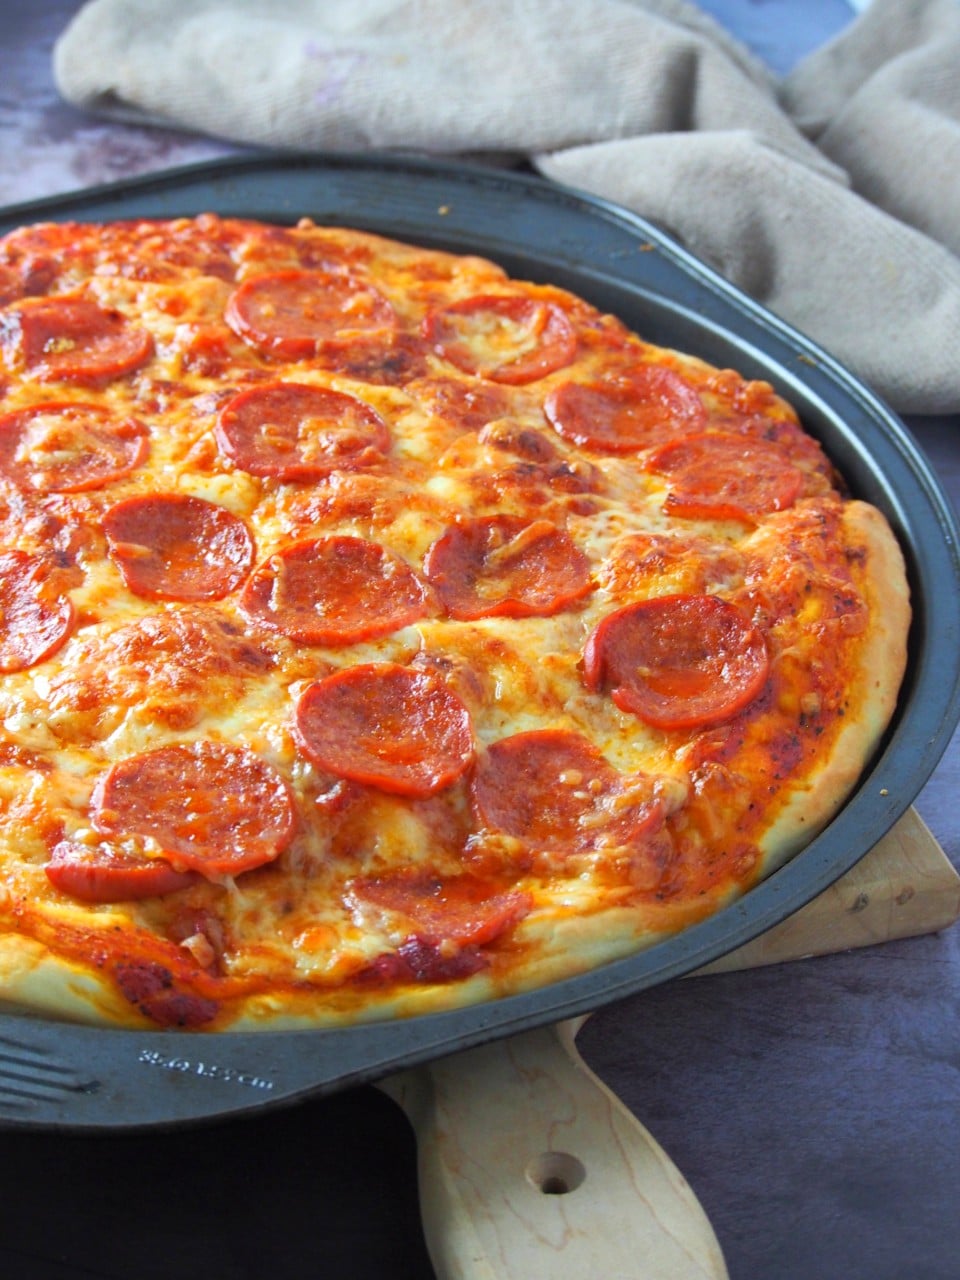 One pizza pan of homemade pepperoni pizza.